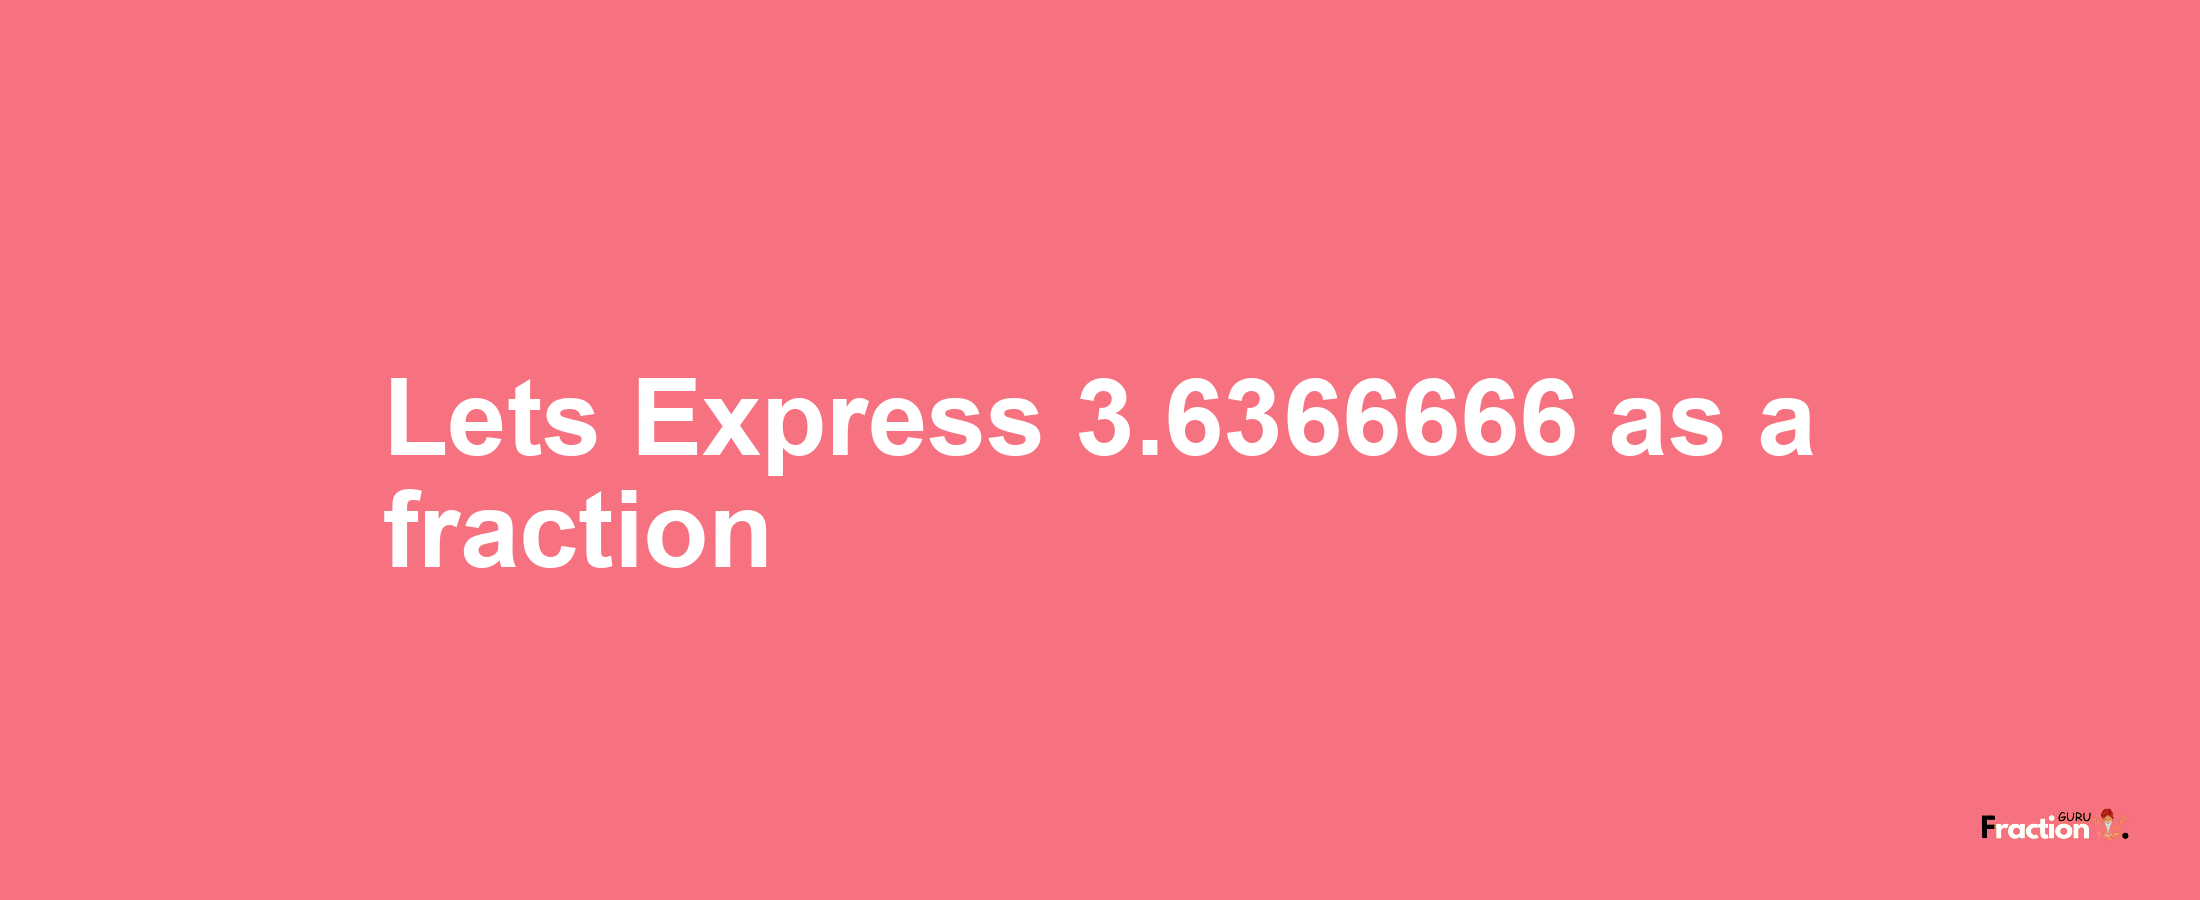 Lets Express 3.6366666 as afraction